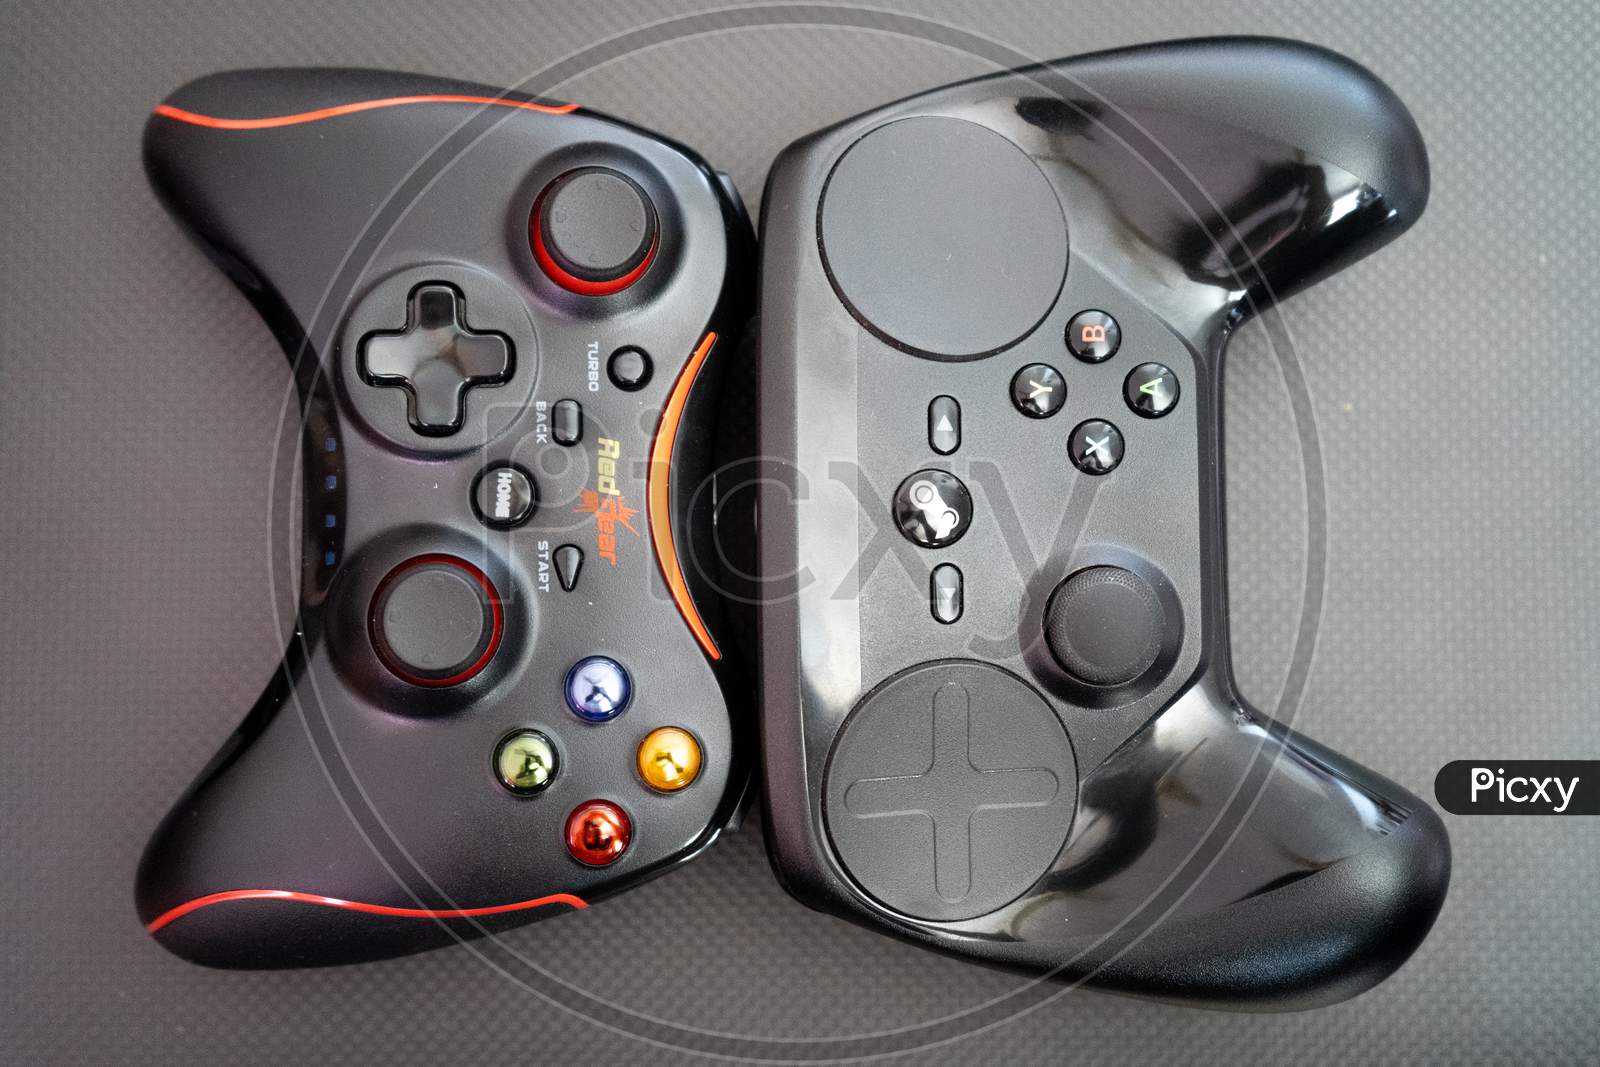 Redgear Vs The Steam Controller On A Carbon Fiber Background Showing Technology Of Inputs For Computer Gaming